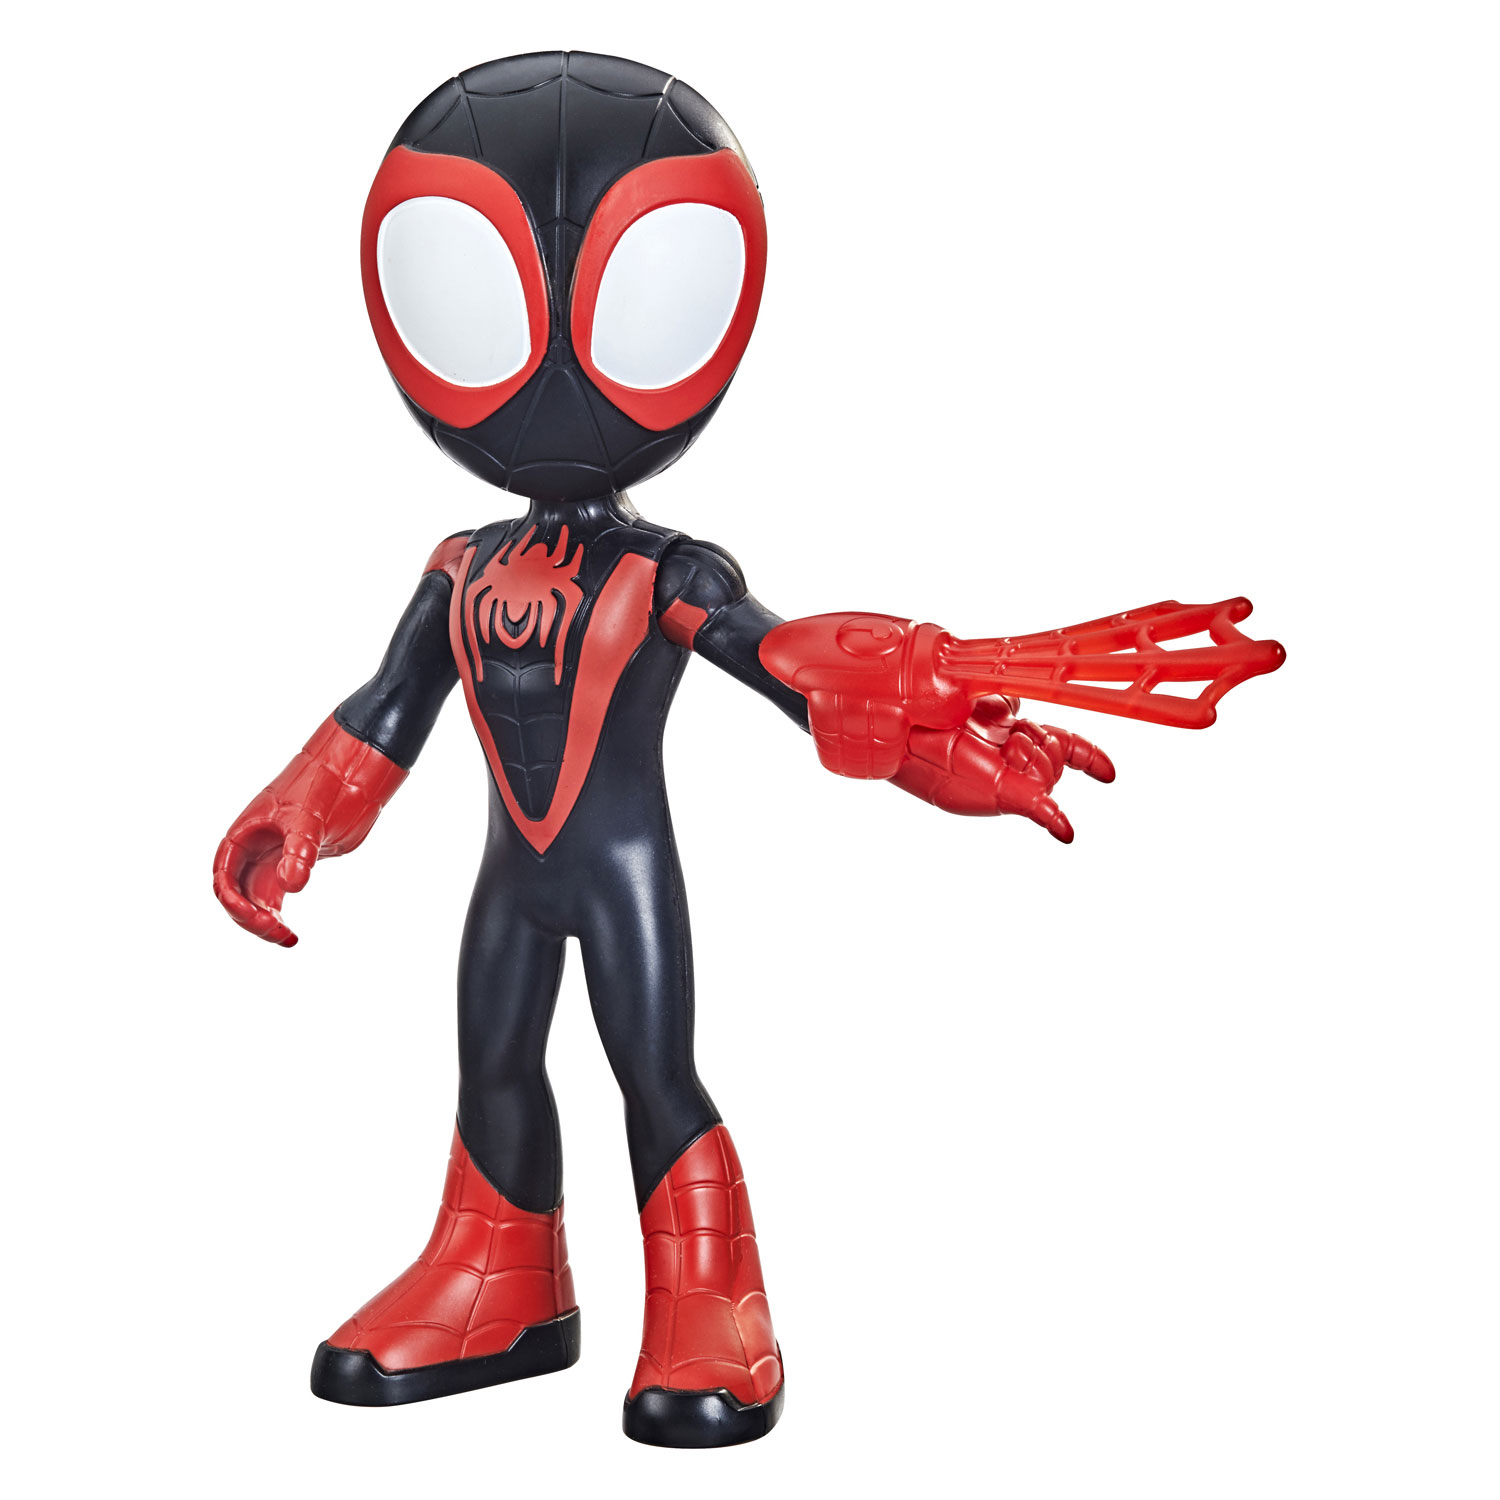 Spiderman head compatible with Playmobil